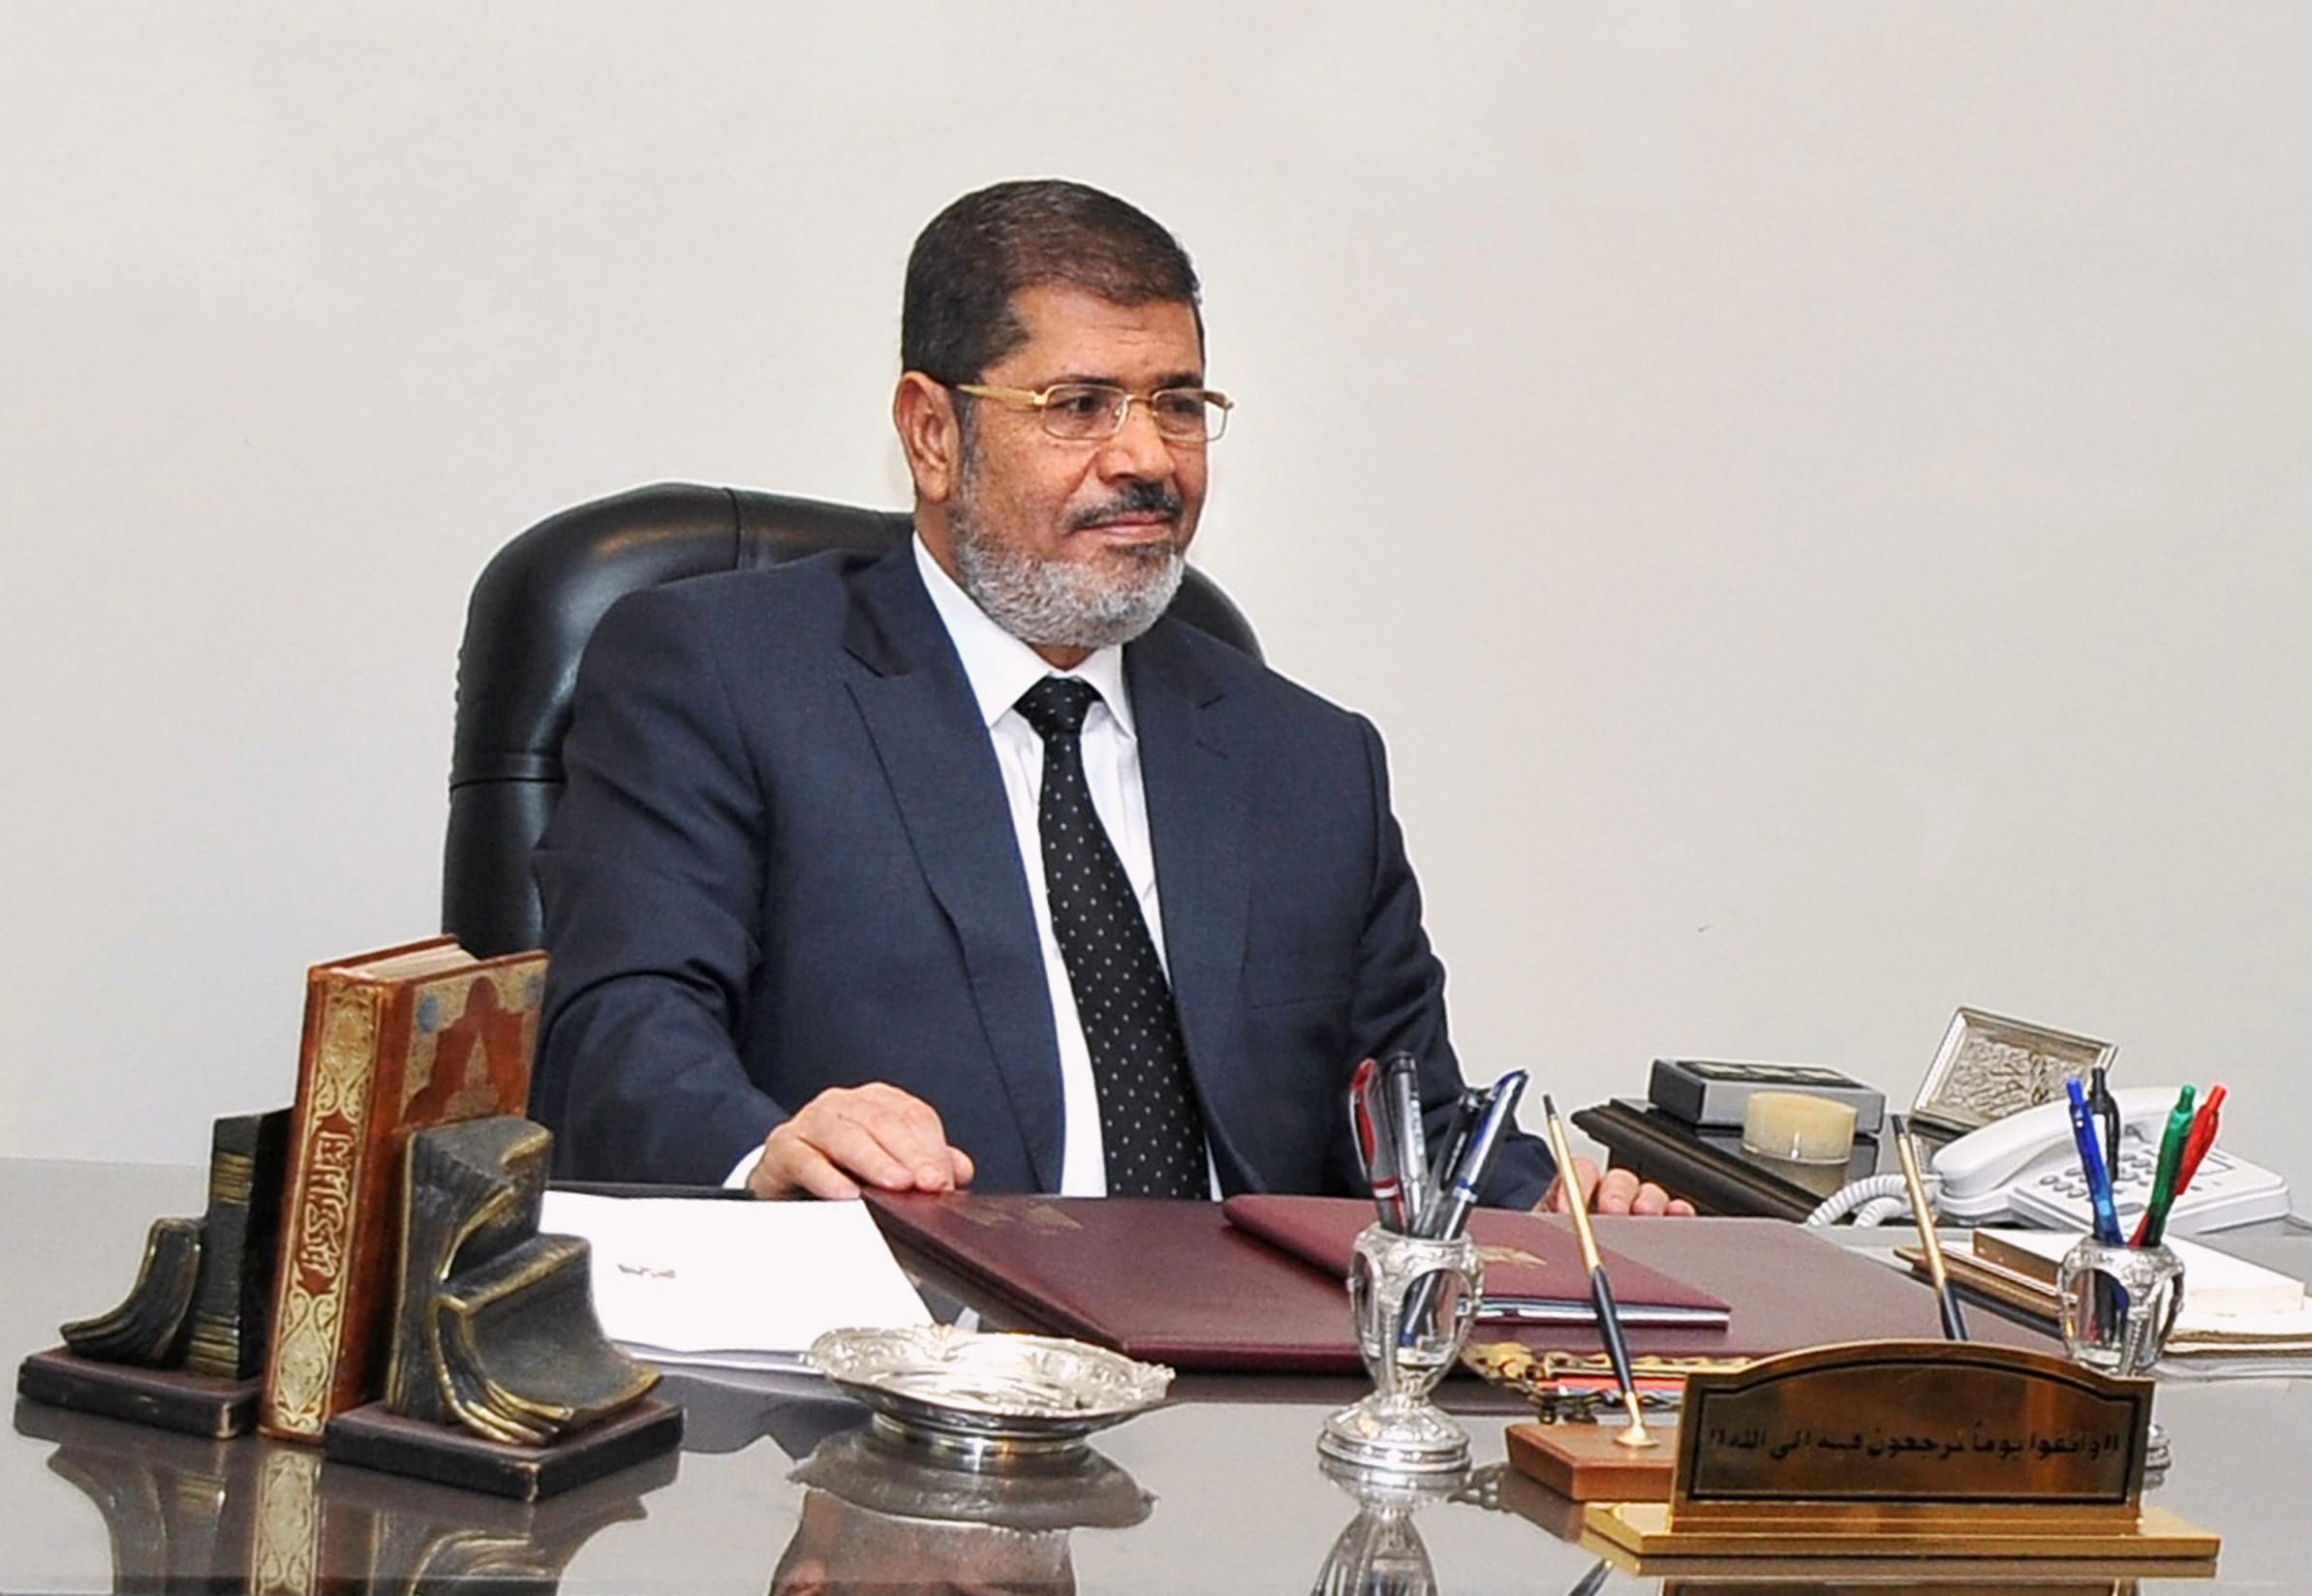 President Mohamed Morsi's party and his government are working to issue a new law designed to nationalize civil society which would deal a mortal blow to human rights organizations, REUTERS/Egyptian Presidency/Handout